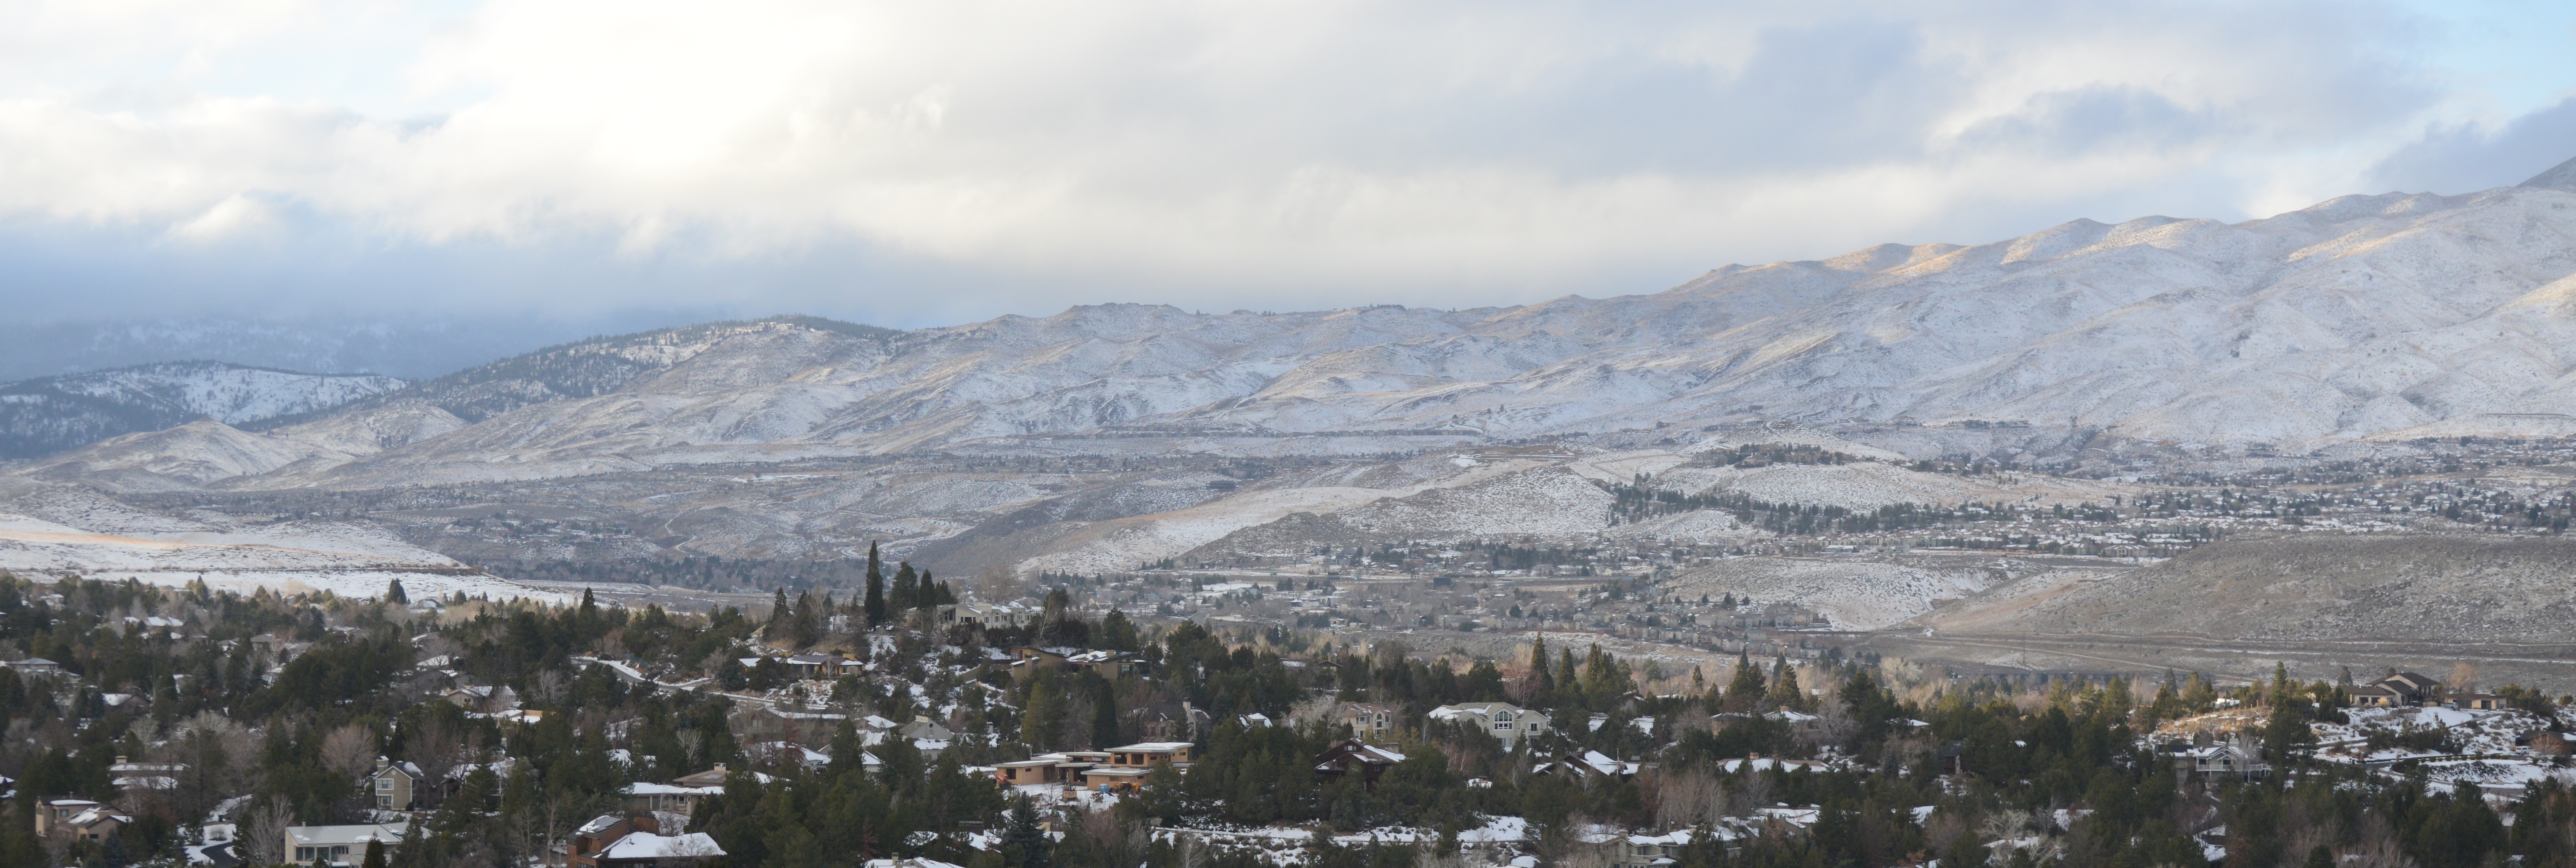 Landscape photograph of the mountains in Reno, Nevada